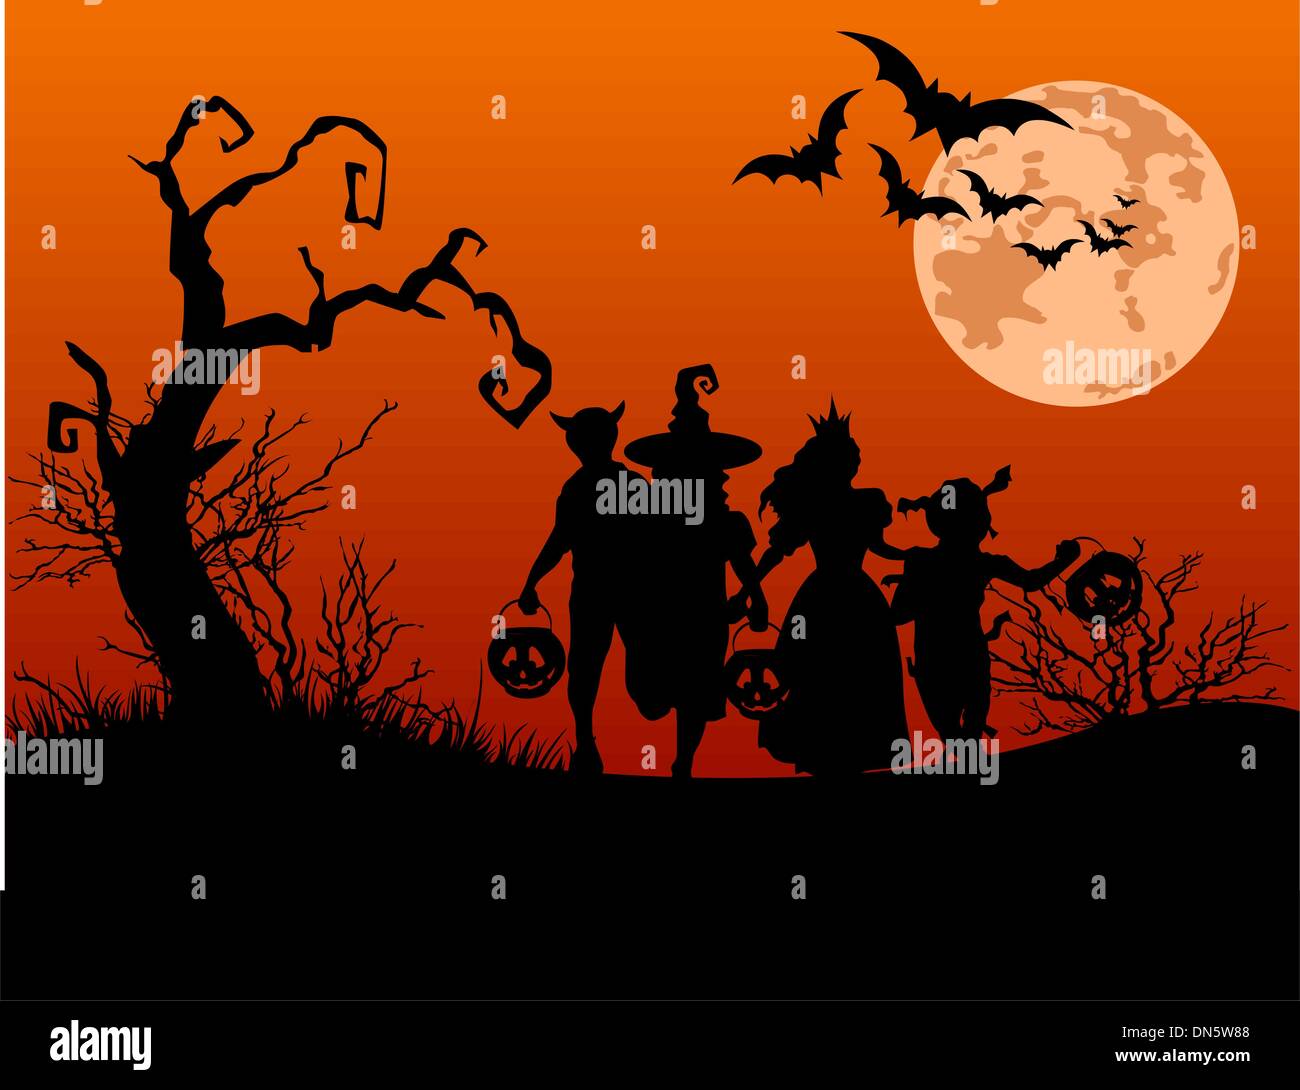 Halloween background with silhouettes of trick or treating children Stock Vector